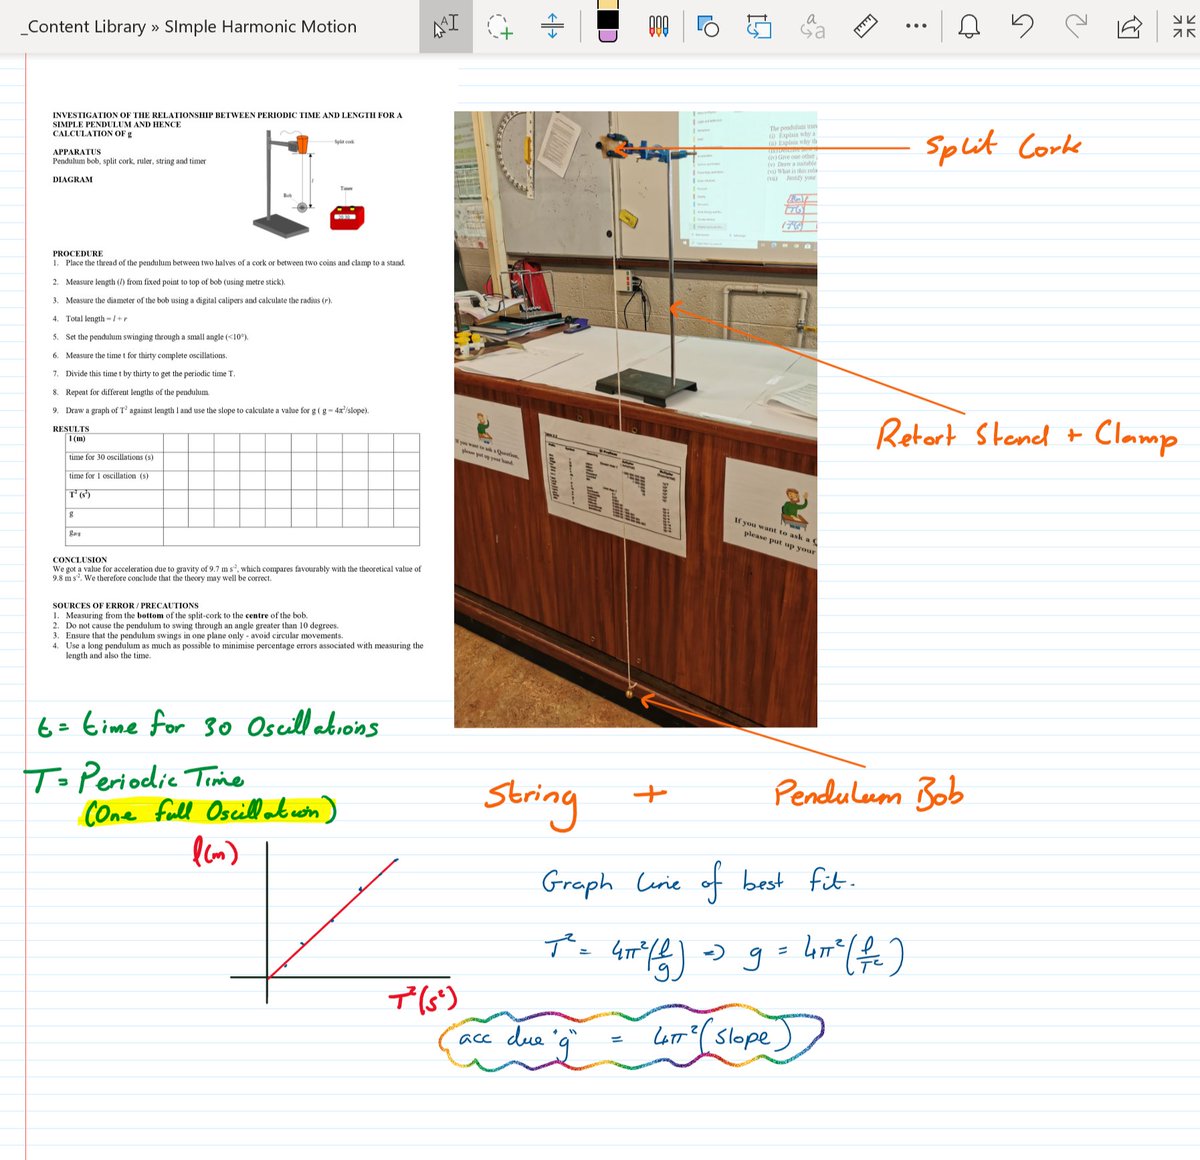 Investigating the relationship between periodic time and length of a simple pendulum today with 5th year Physics, and using the graph to calculate acc due to gravity. #Onenote  and @surface being used all along the way! #cbsthegreen #LCphysics  @eustace_stephen @gaughranian